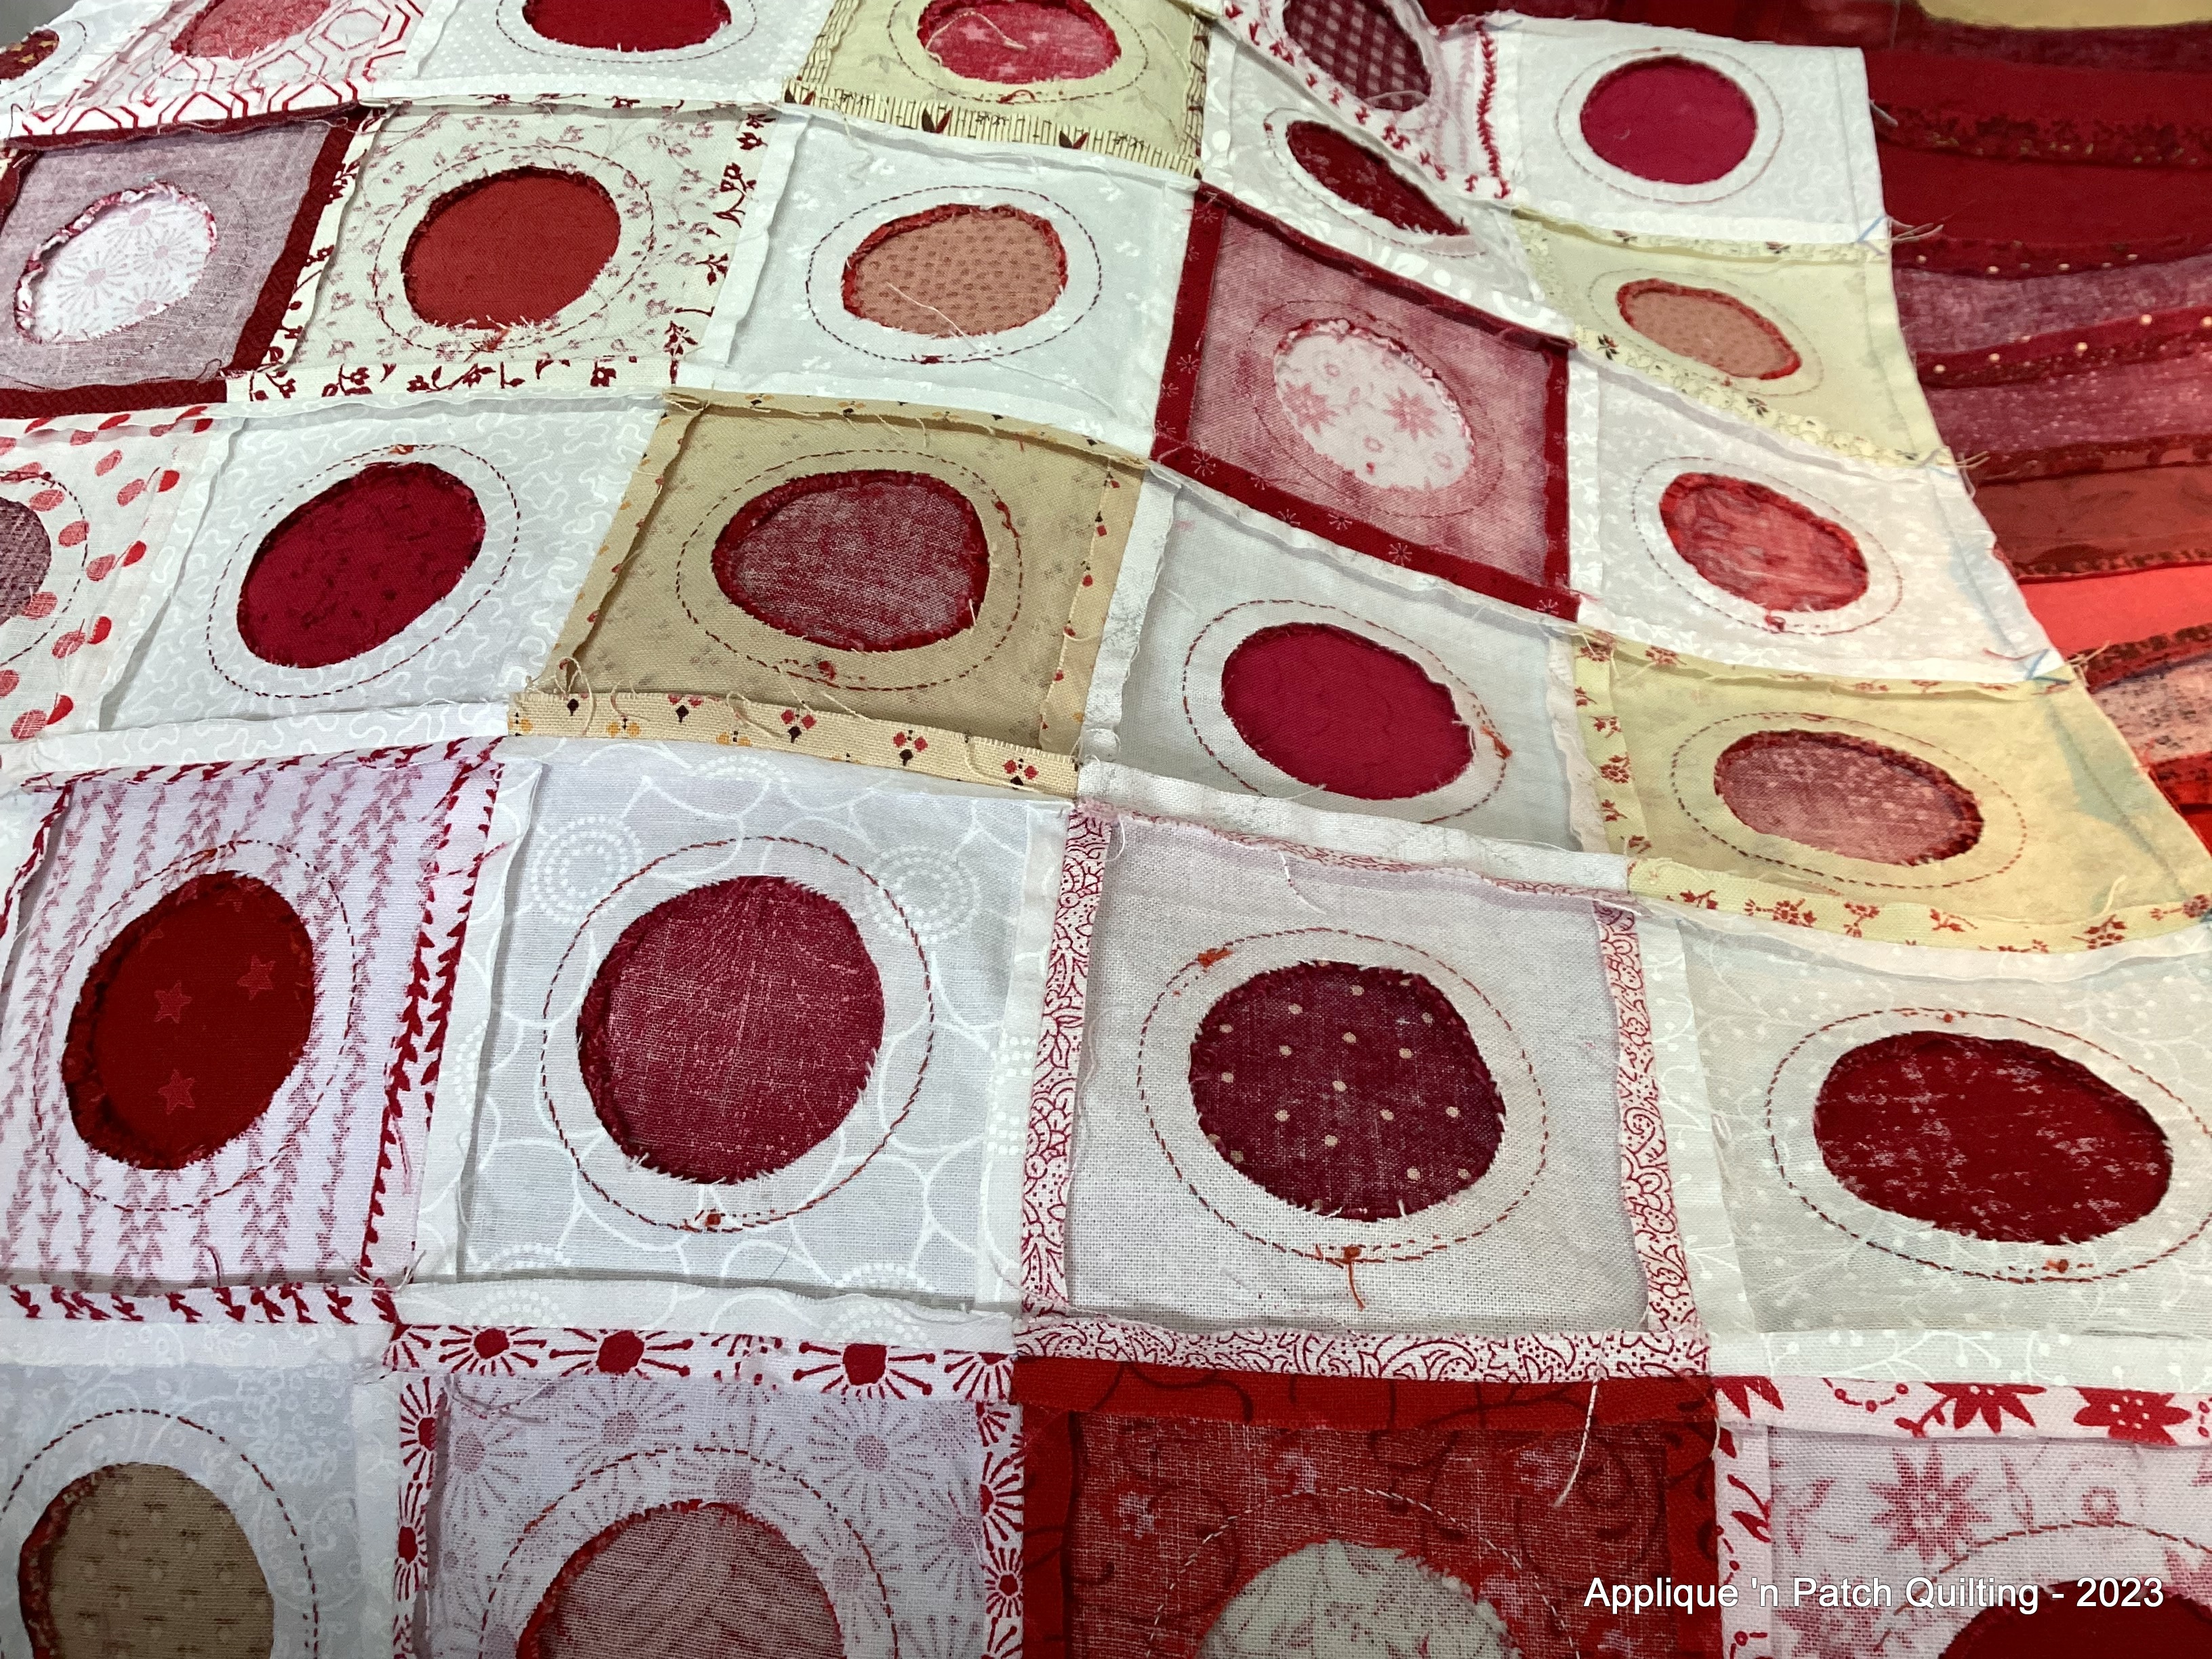 Applique 'n Patch Quilting: Circles is a